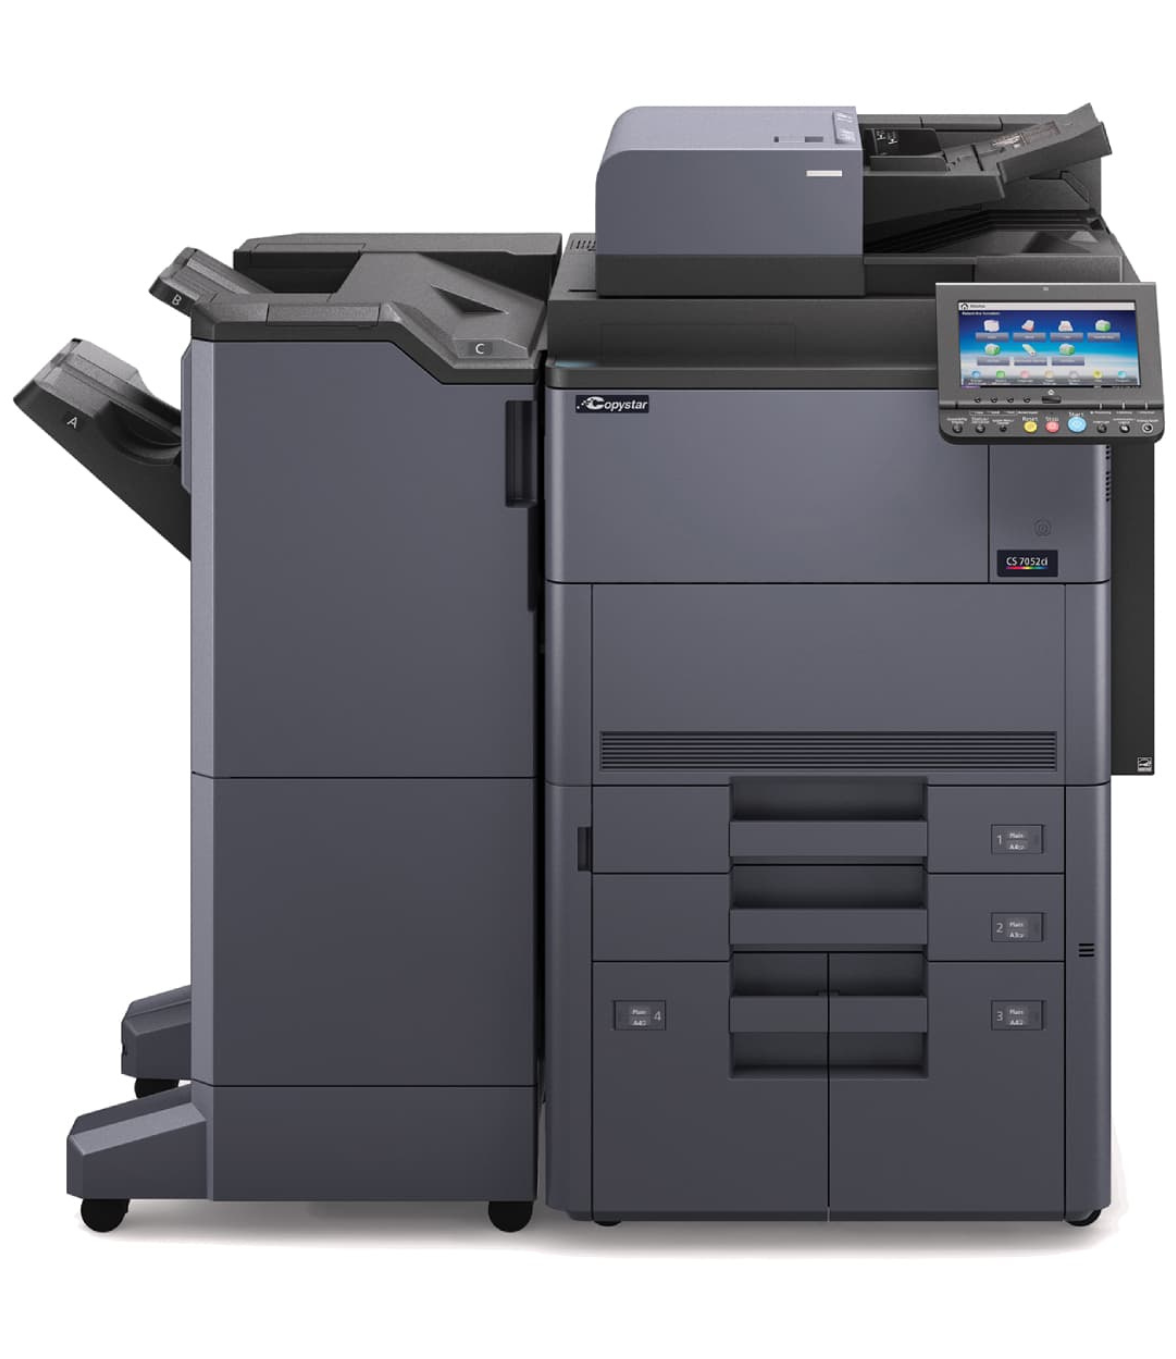 Energy-efficient Copiers can save your cost as well as environment 